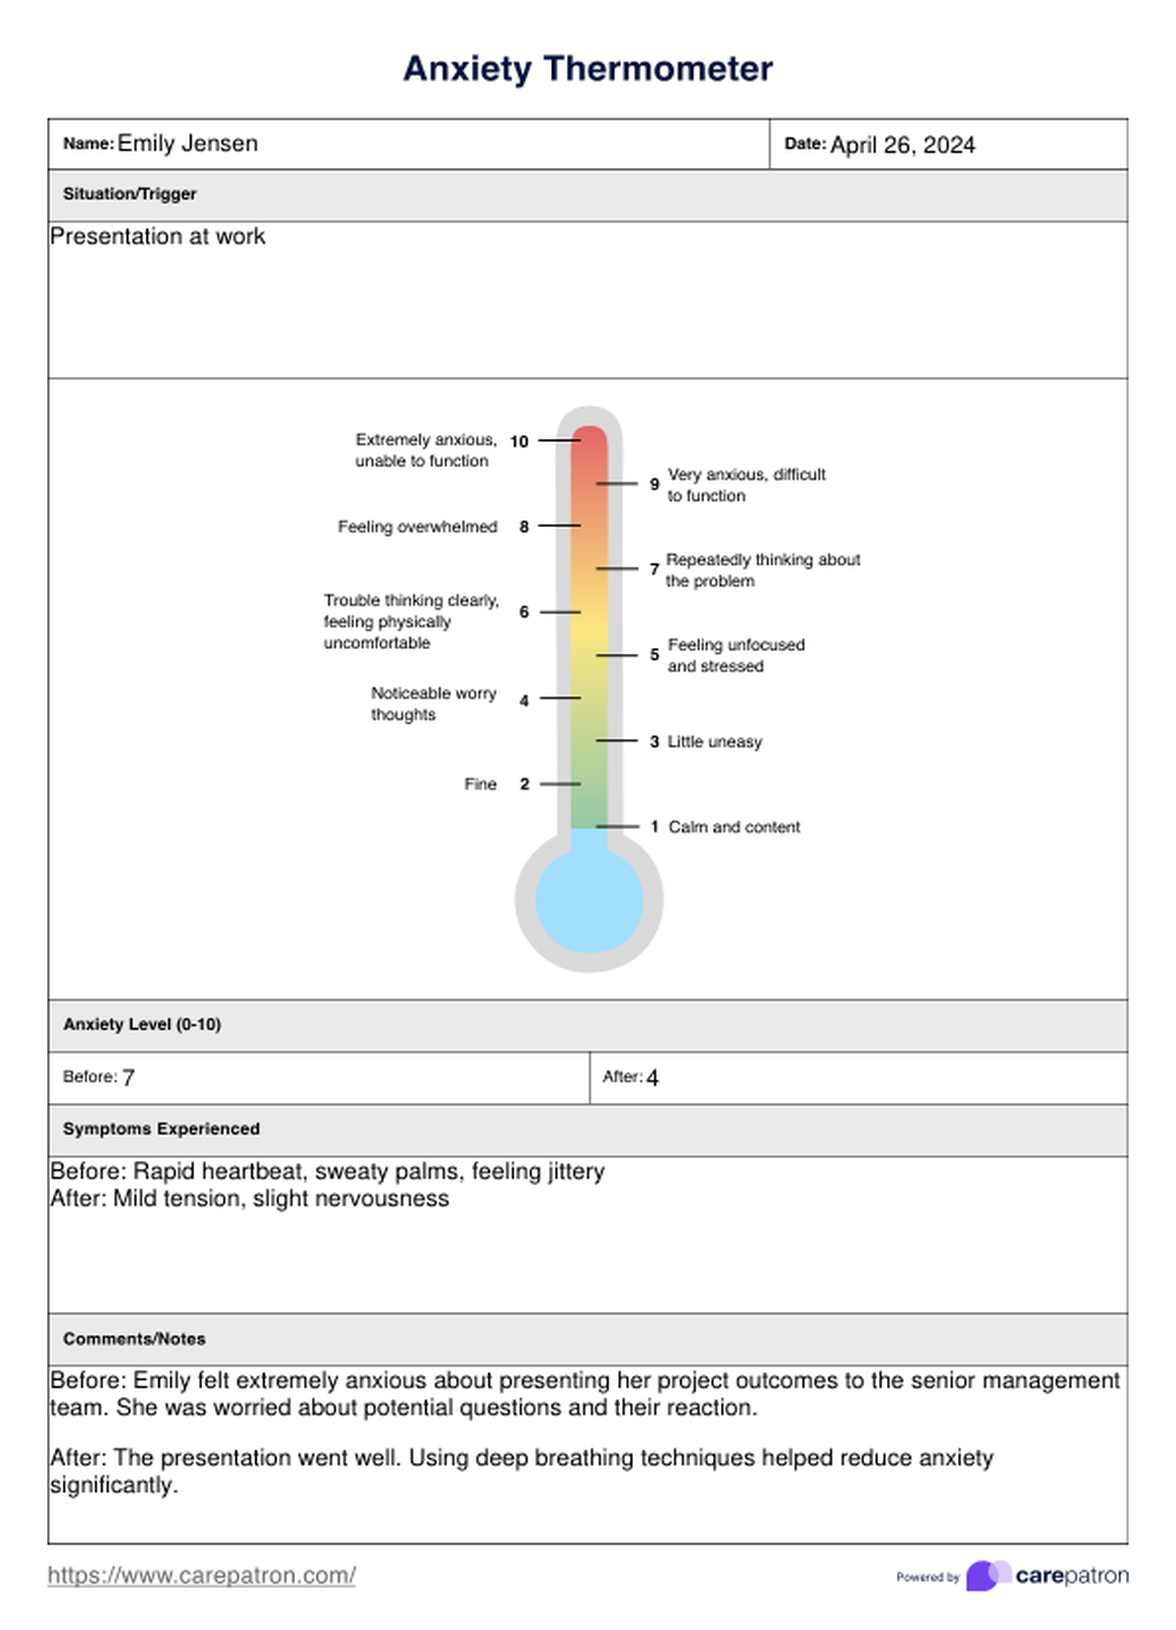 Anxiety Thermometer PDF Example